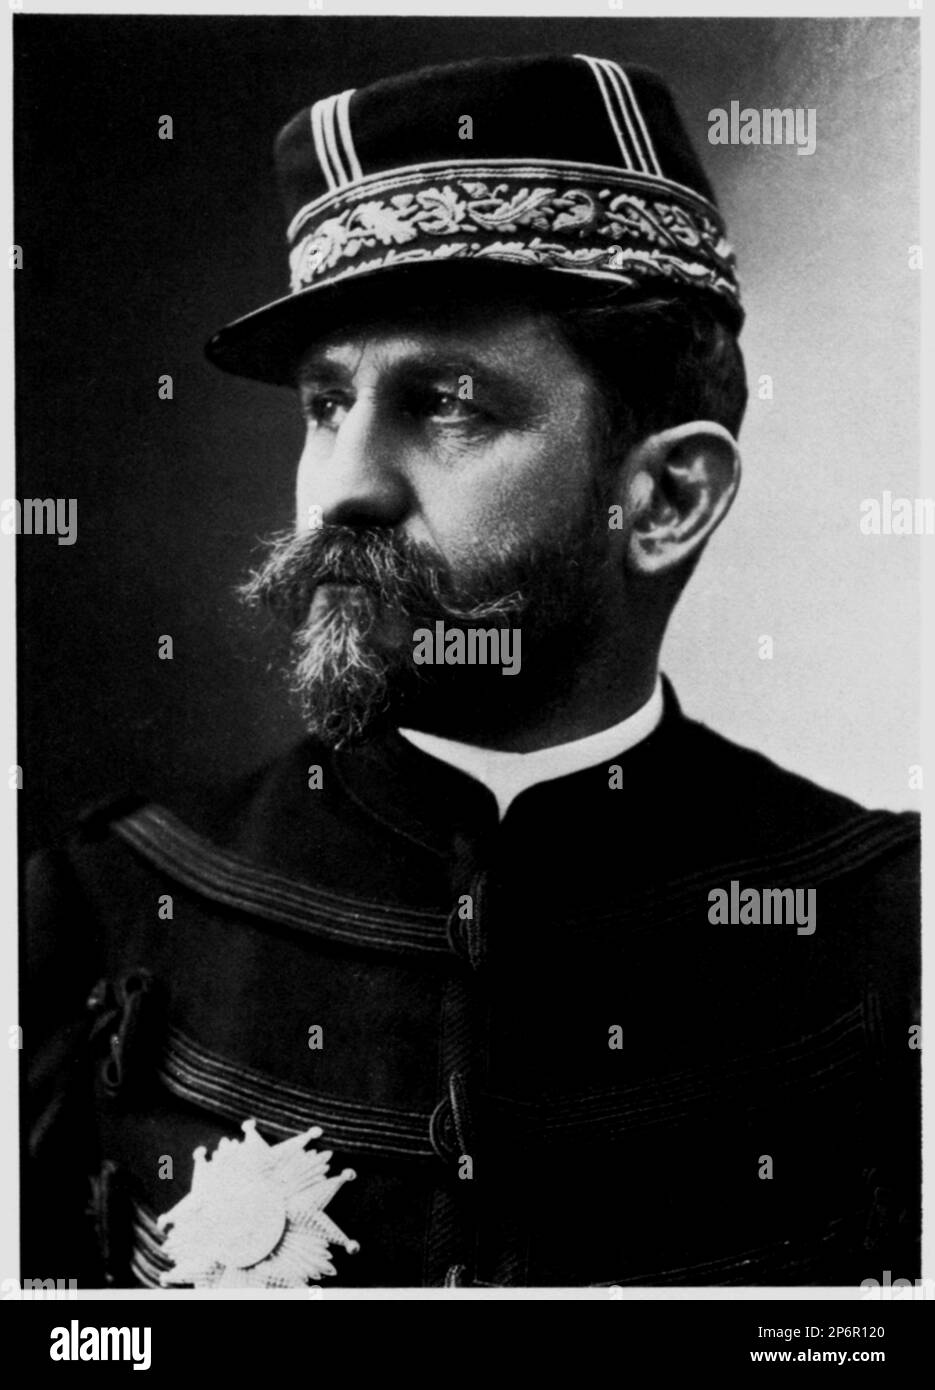 1880 c, FRANCE : GEORGES BOULANGER  ( 1837 – 1891) was a French general and reactionary politician . Photo by NADAR , Paris , France  - POLITICO - POLITICA - POLITIC  - foto storiche - foto storica - portrait - ritratto - beard - barba  - military uniform - divisa - uniforme militare - baffi - moustache - generale - hat - cappello  ---- Archivio GBB Stock Photo